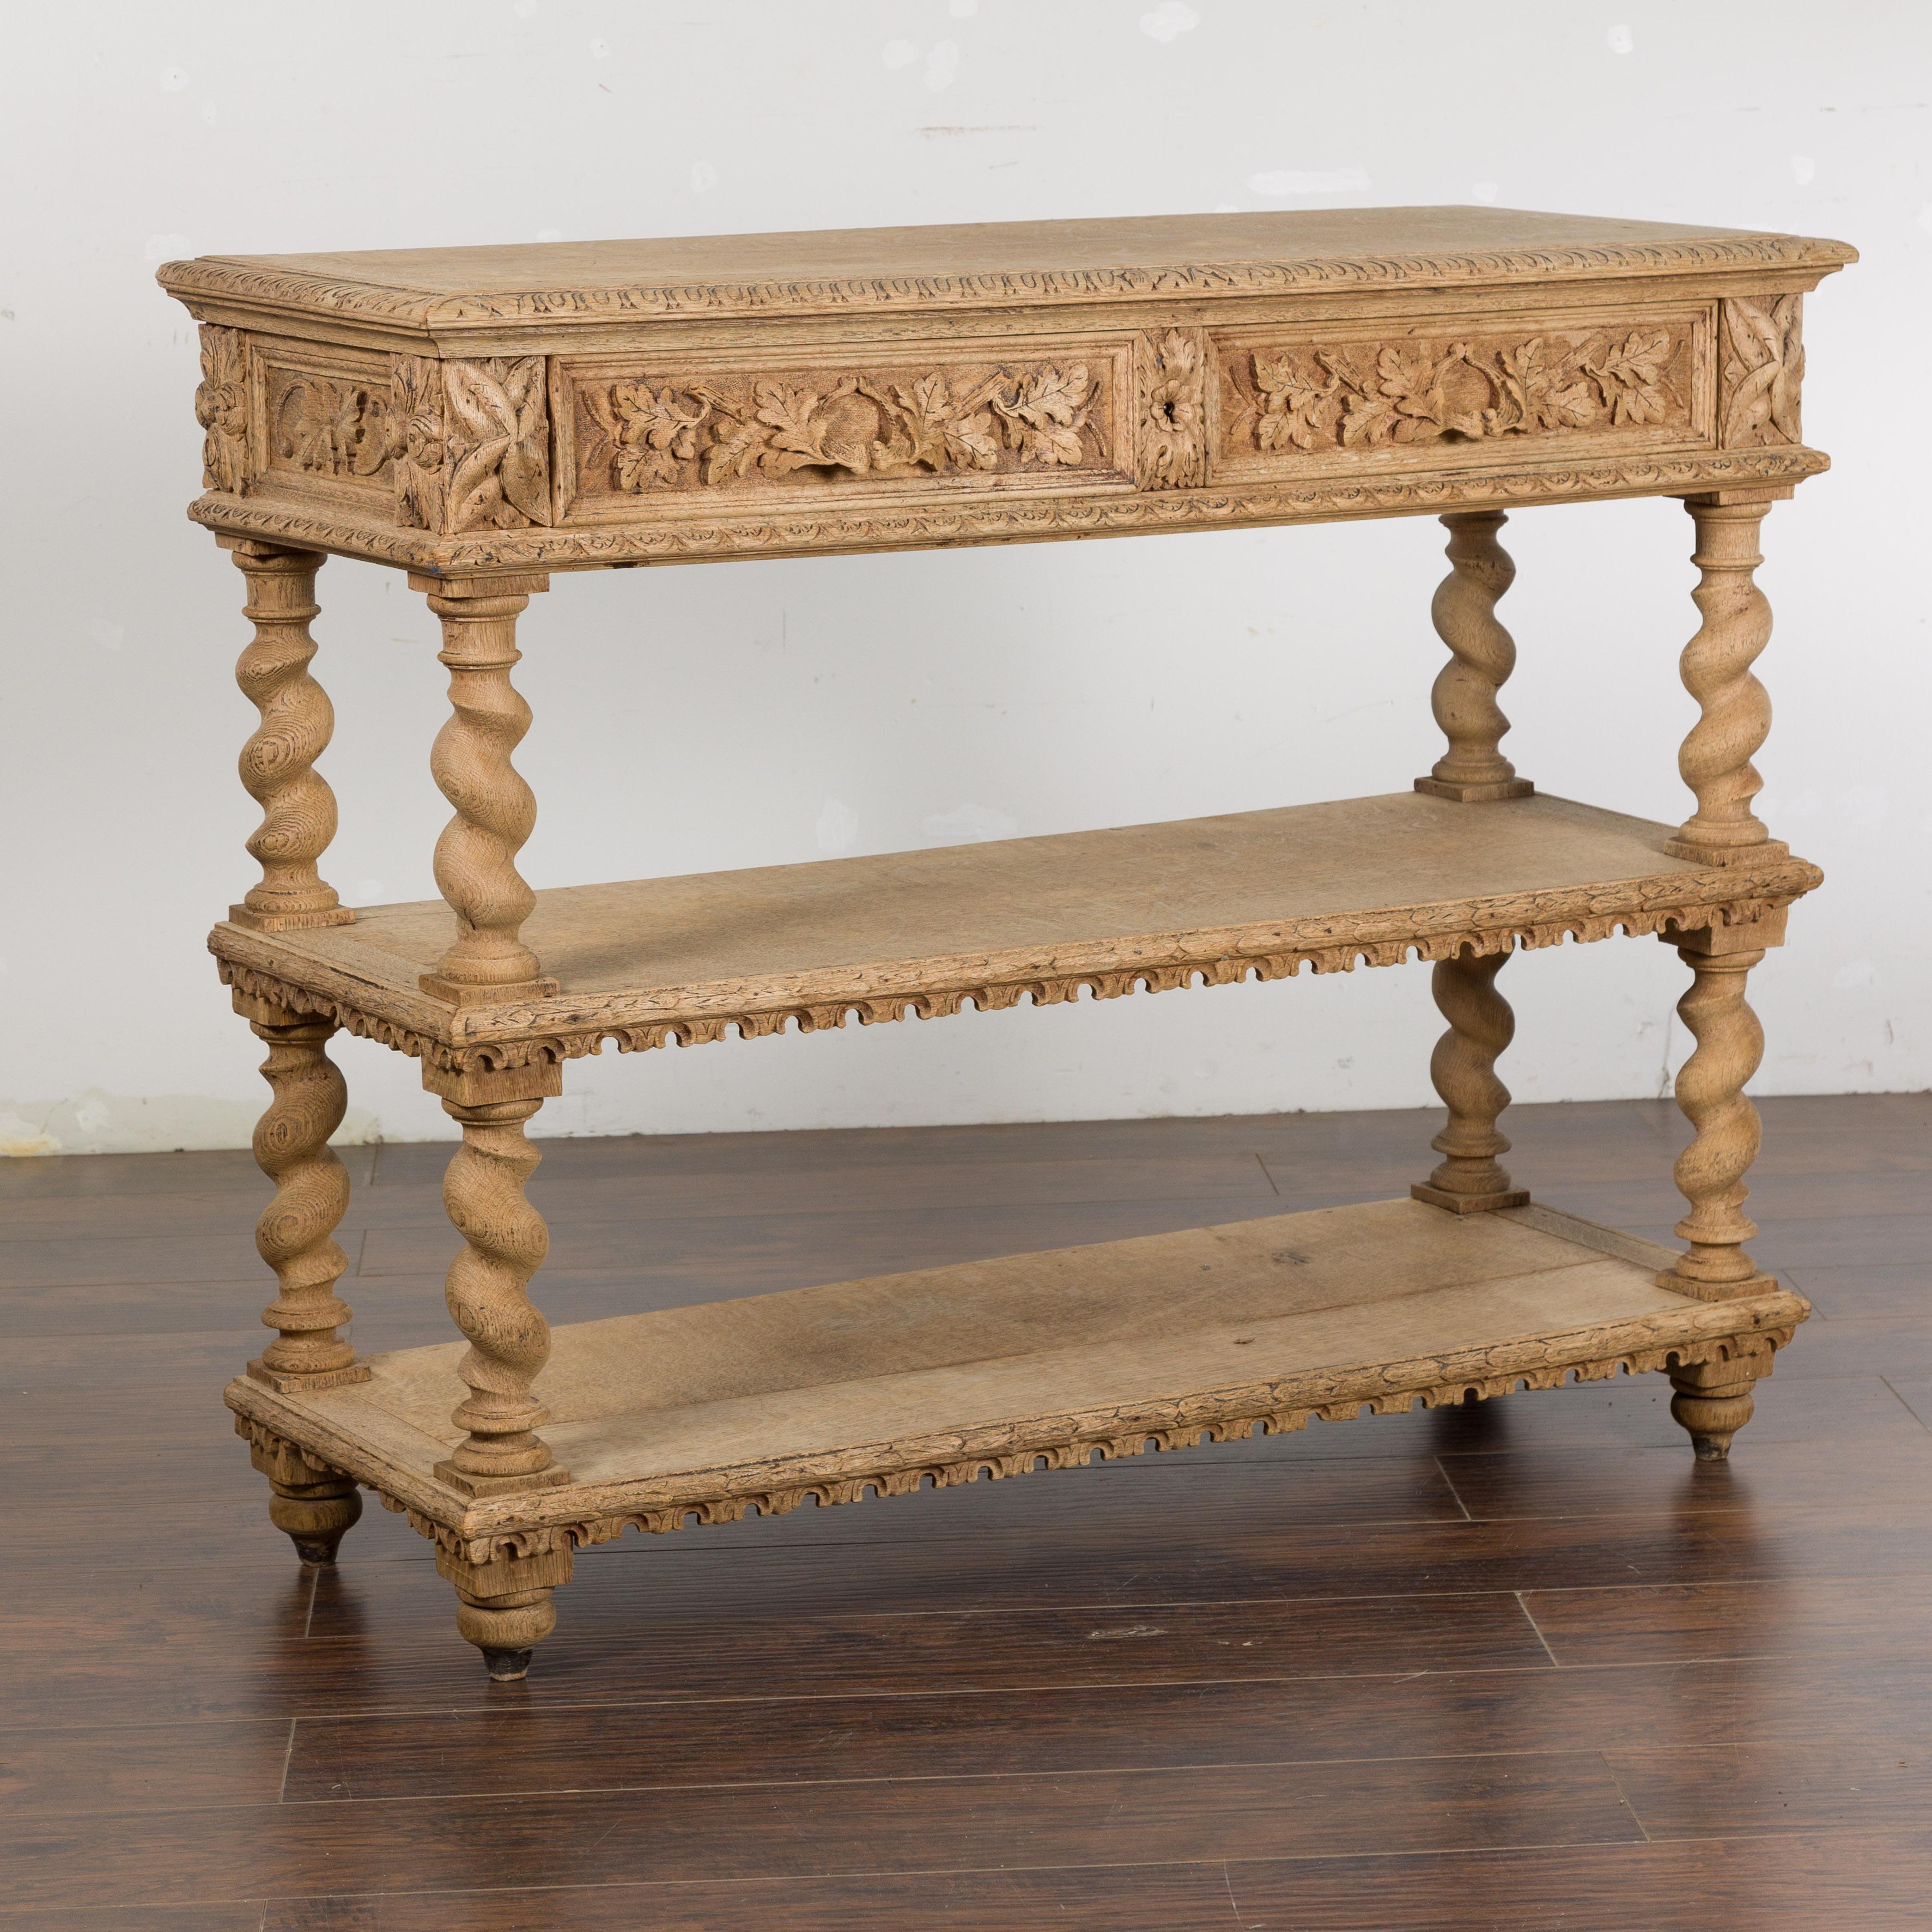 English 1880s Oak Barley Twist Console Table with Two Foliage Carved Drawers In Good Condition For Sale In Atlanta, GA